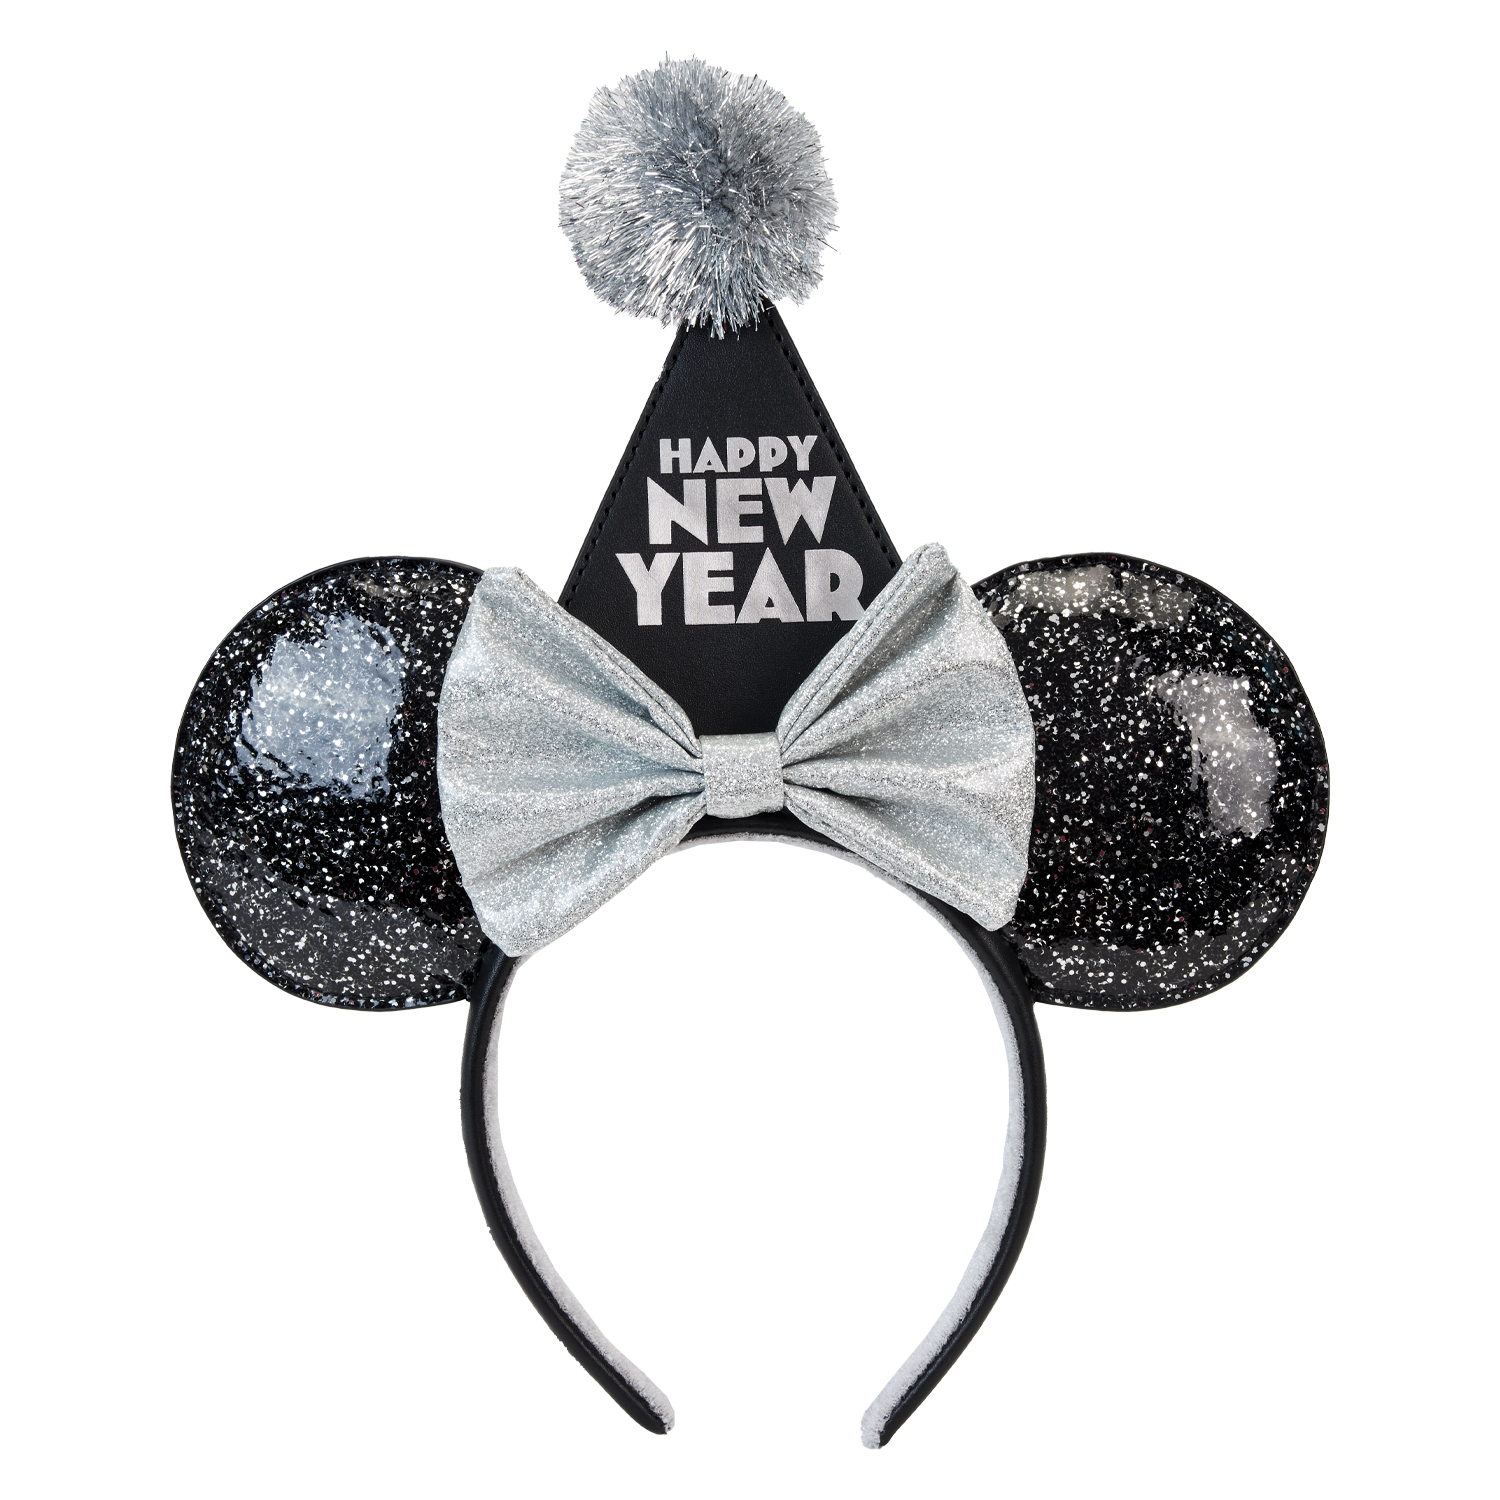 Buy Minnie Mouse Exclusive Happy New Year Glitter Ear Headband at Loungefly.